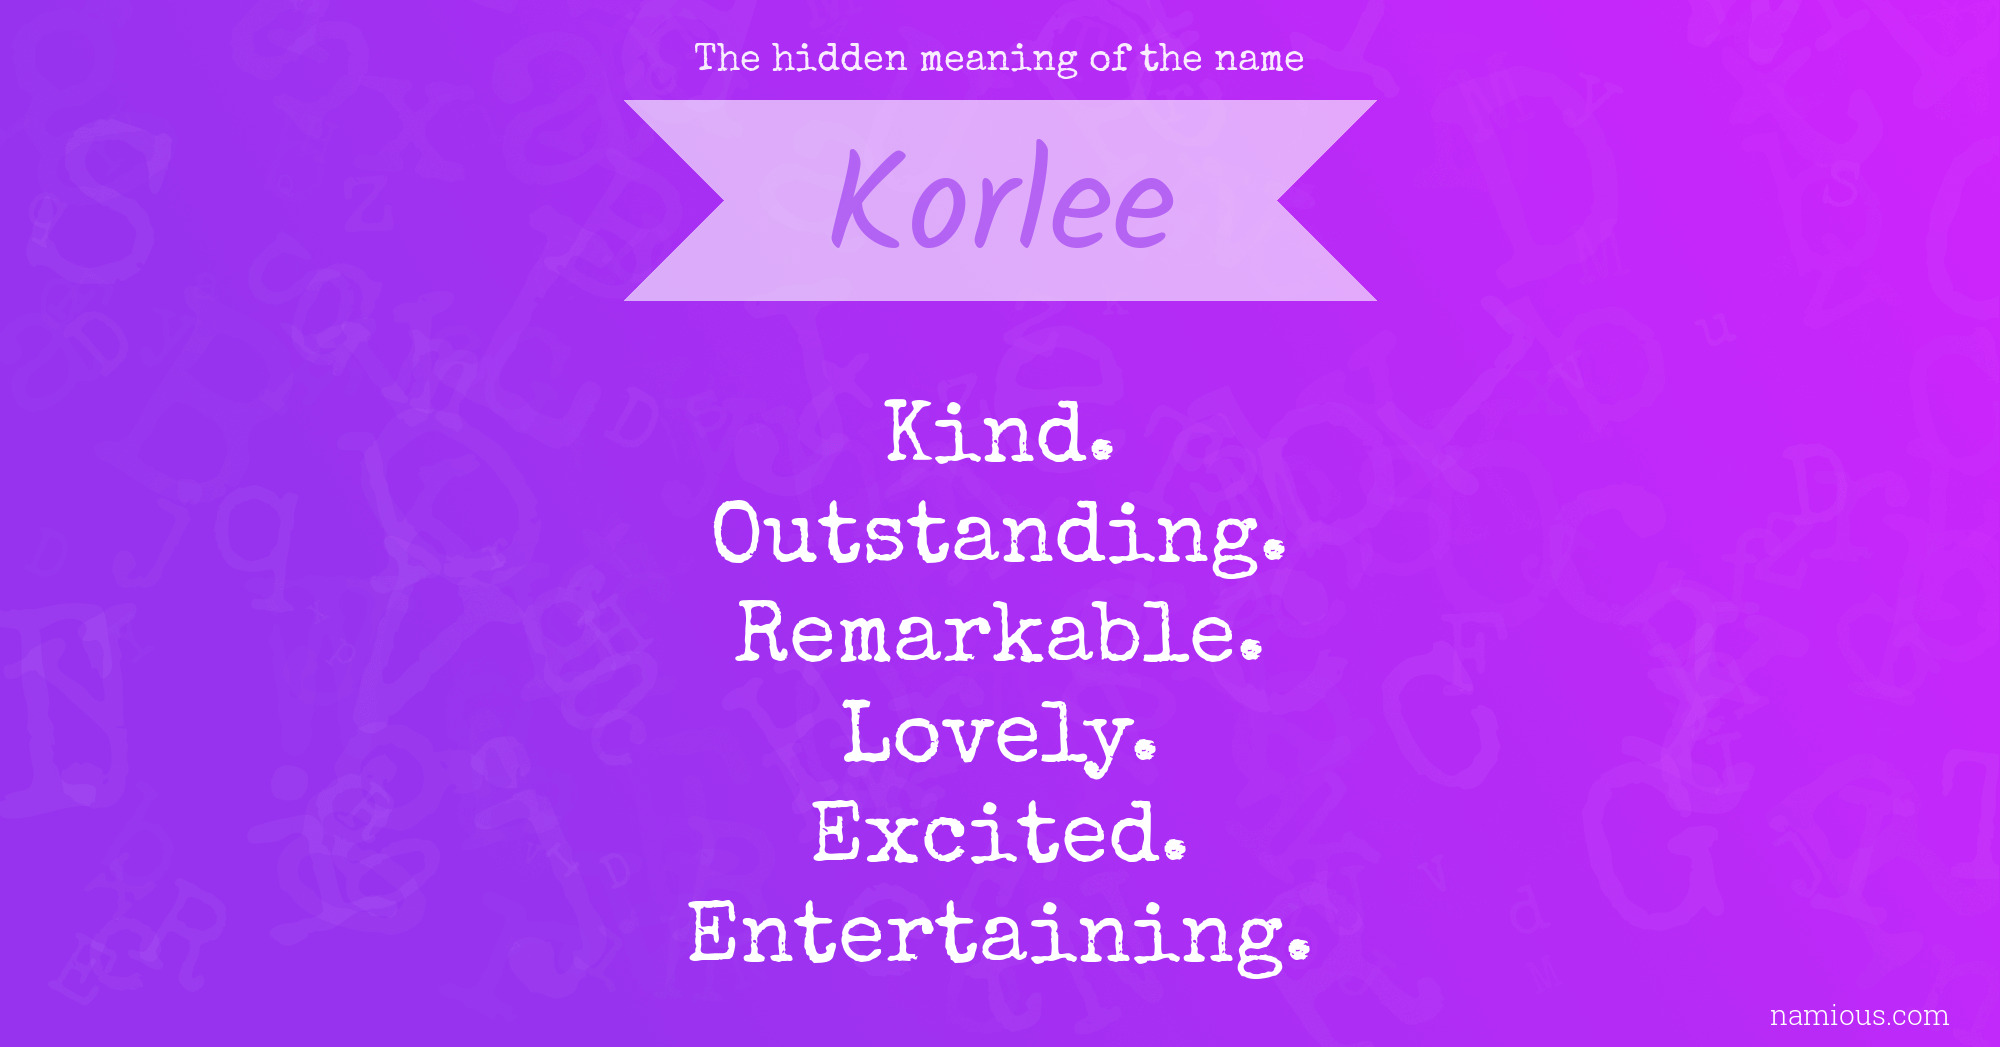 The hidden meaning of the name Korlee